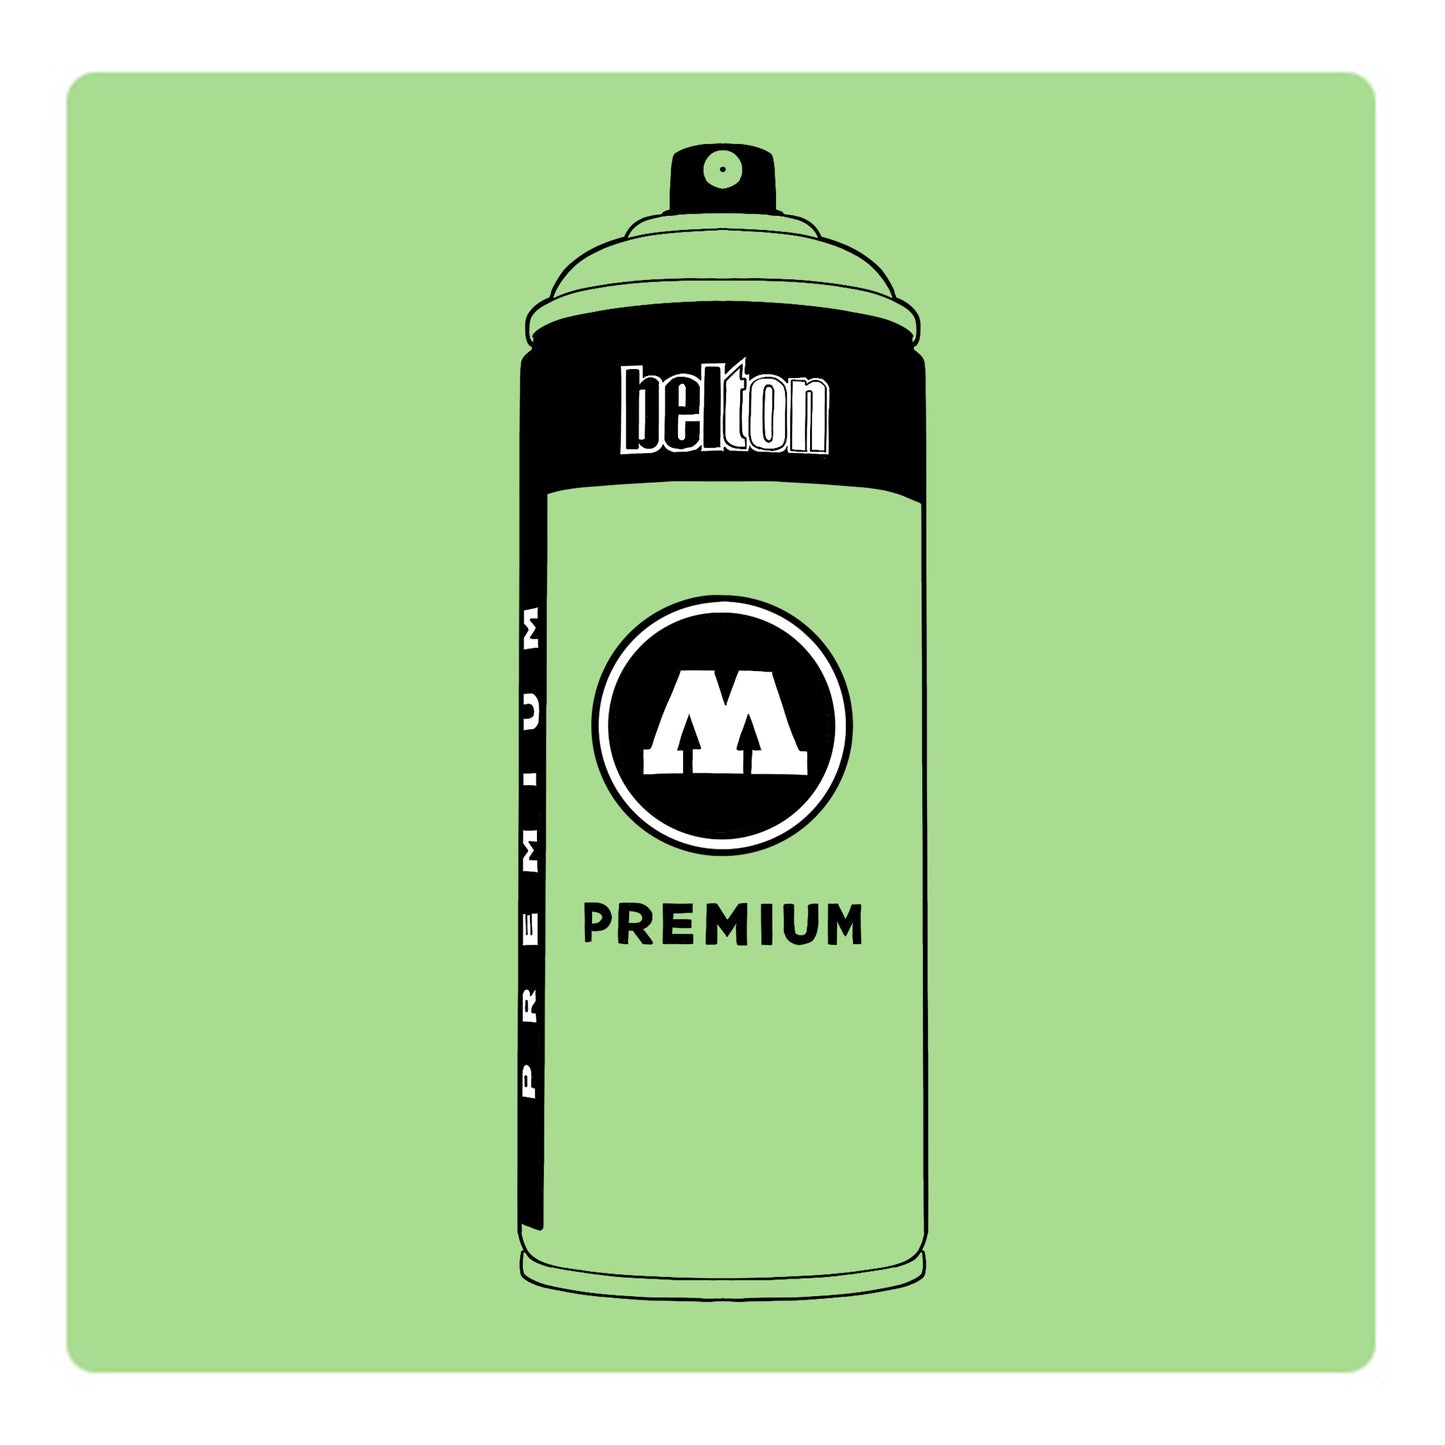 A black outline drawing of a pastel lime green spray paint can with the words "belton","premium" and the letter"M" written on the face in black and white font. The background is a color swatch of the same pastel lime green with a white border